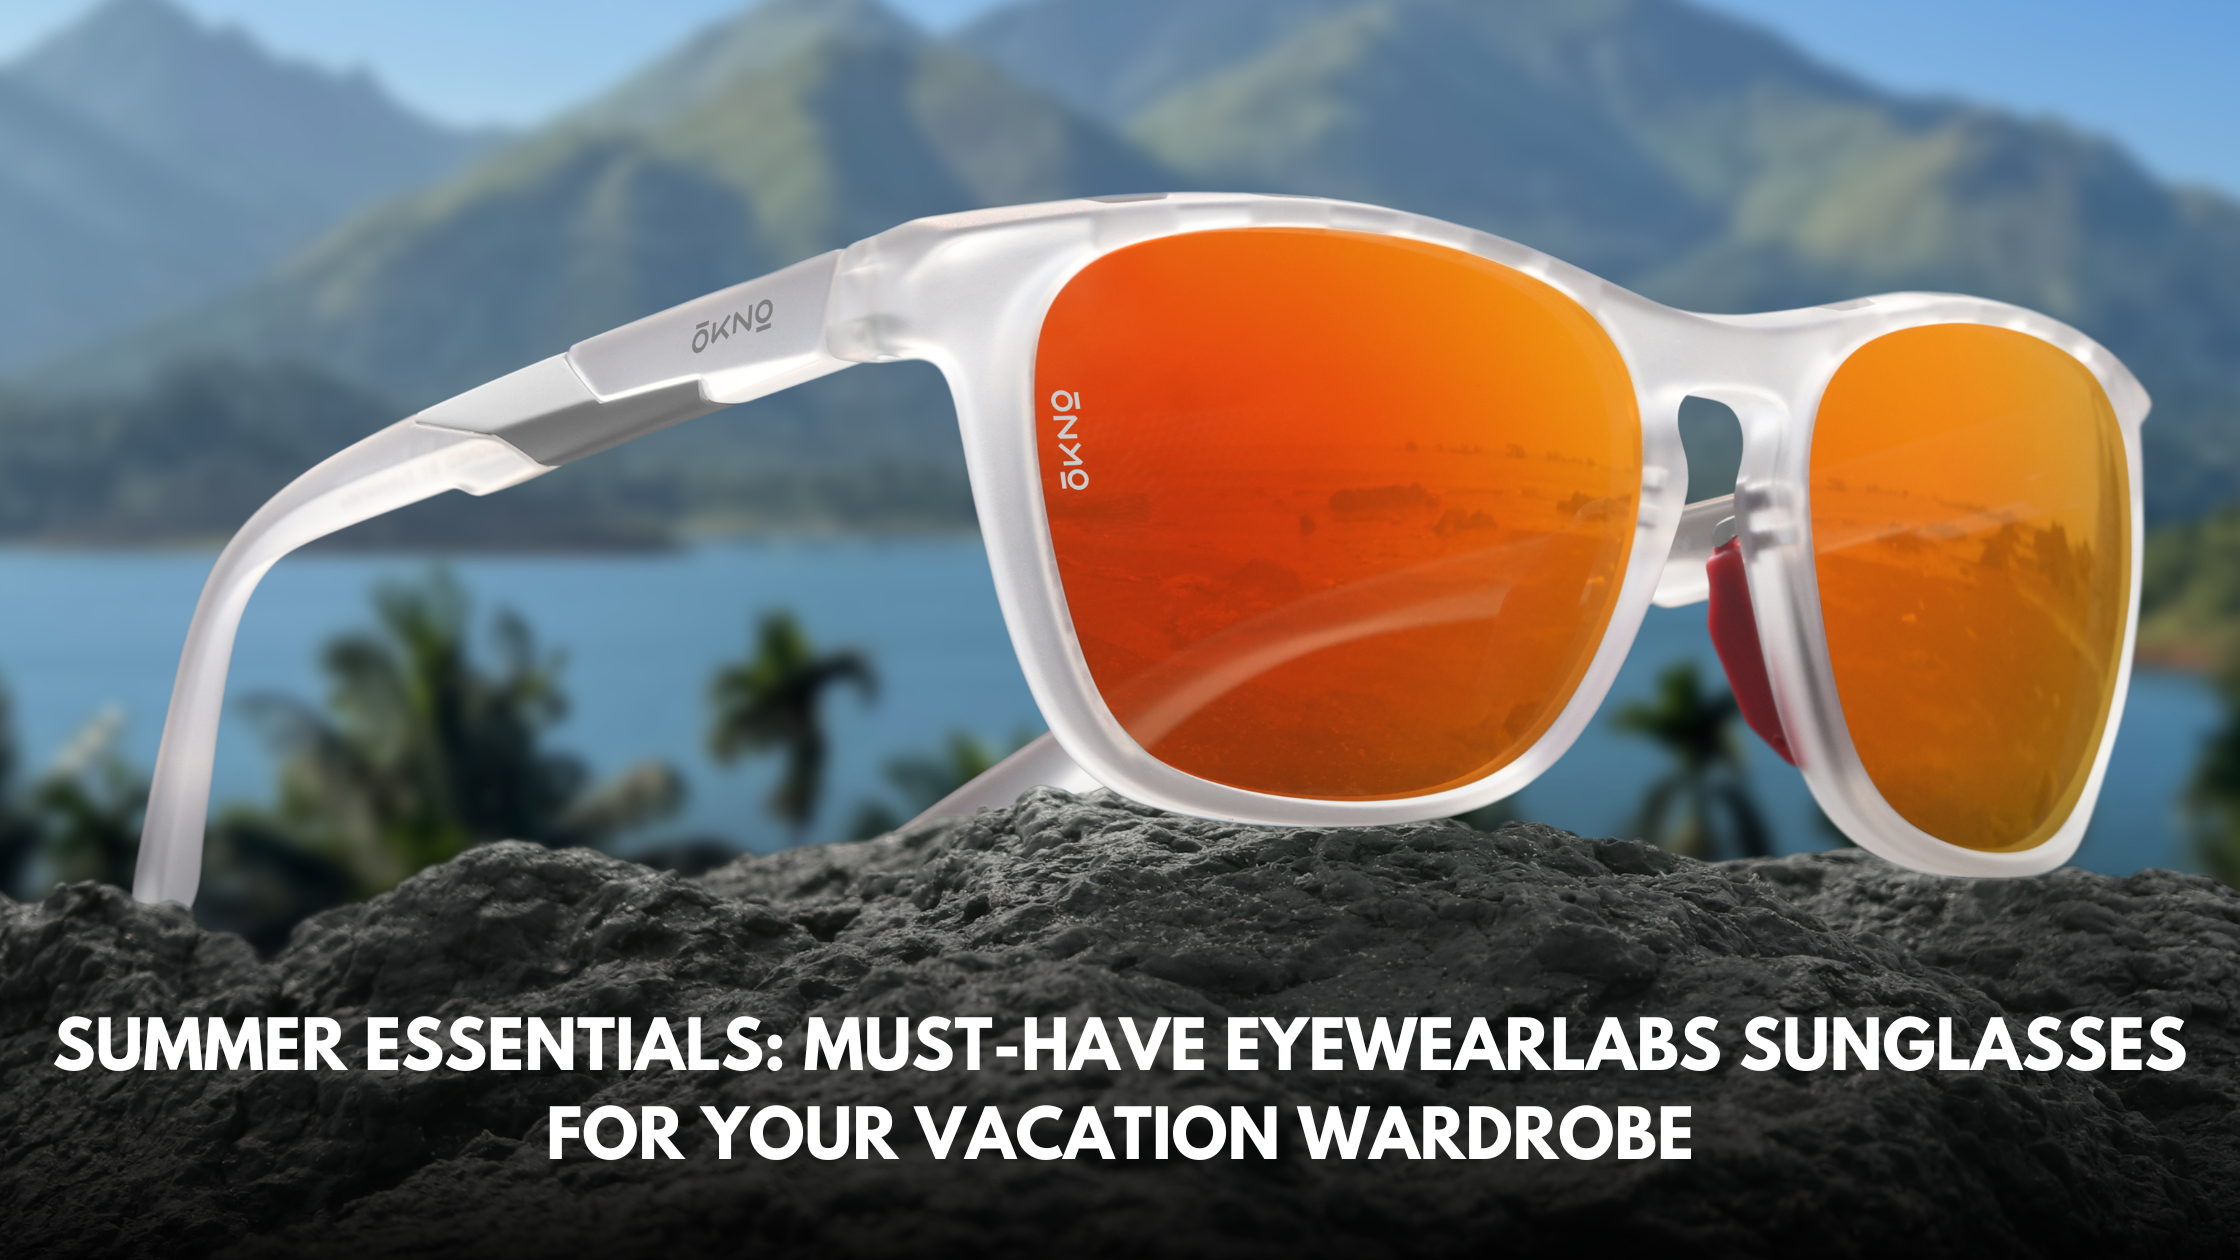 Summer Essentials: Must-Have Eyewearlabs Sunglasses for Your Vacation Wardrobe